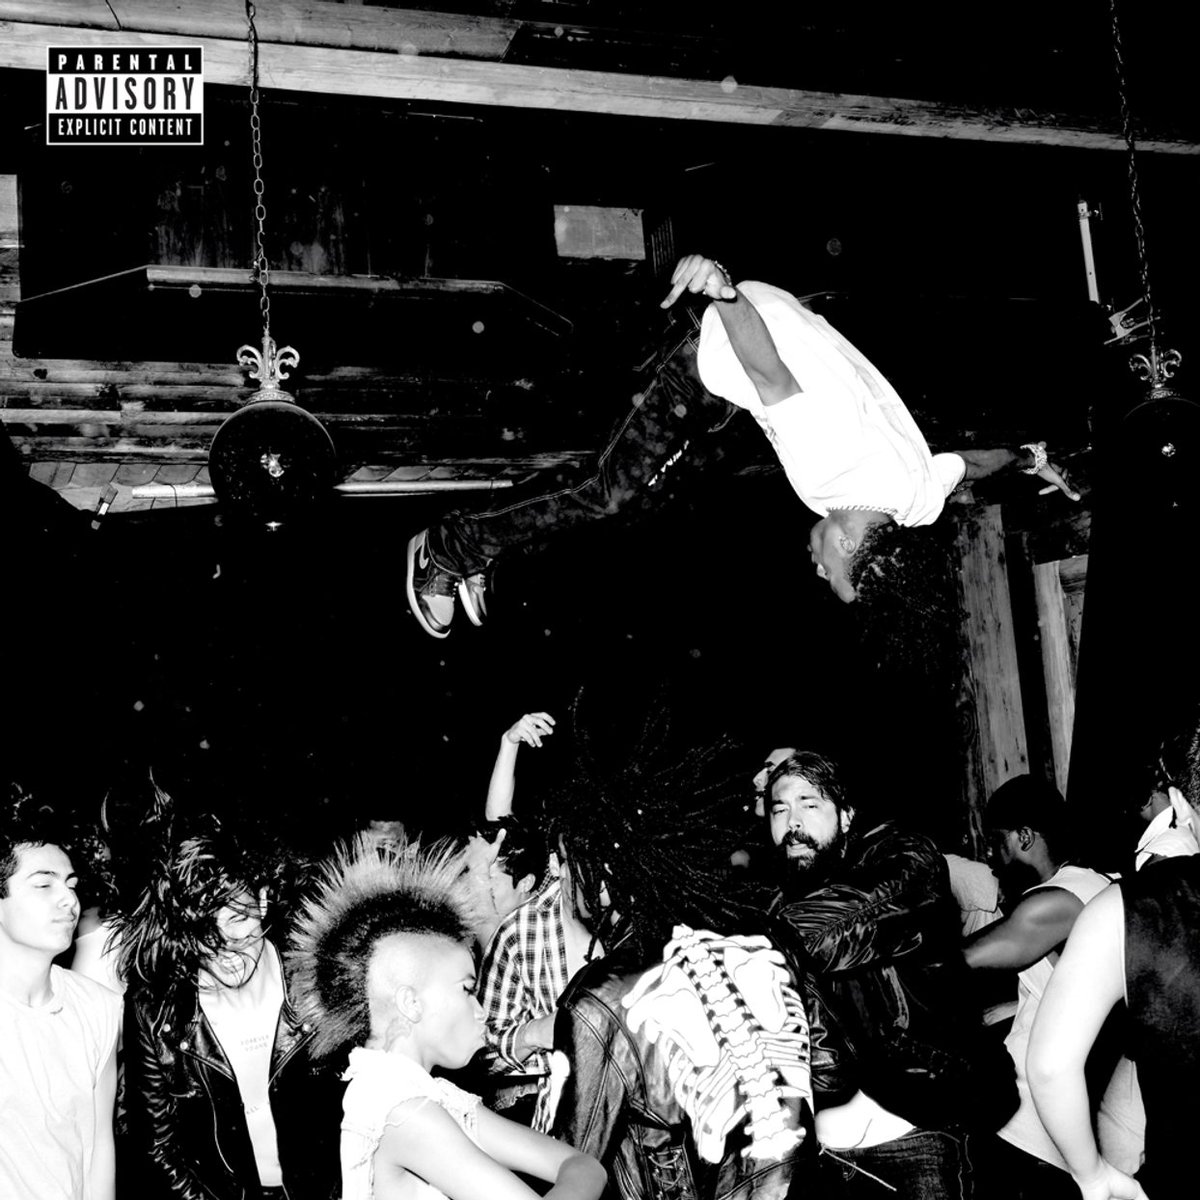 it's officially been two years since playboi carti dropped ‘die lit’ with features from skepta, travis scott, lil uzi vert, pi'erre bourne, nicki minaj, bryson tiller, chief keef, gunna, redd coldhearted, young thug, and young nudy 🦋🔥 favorite track?